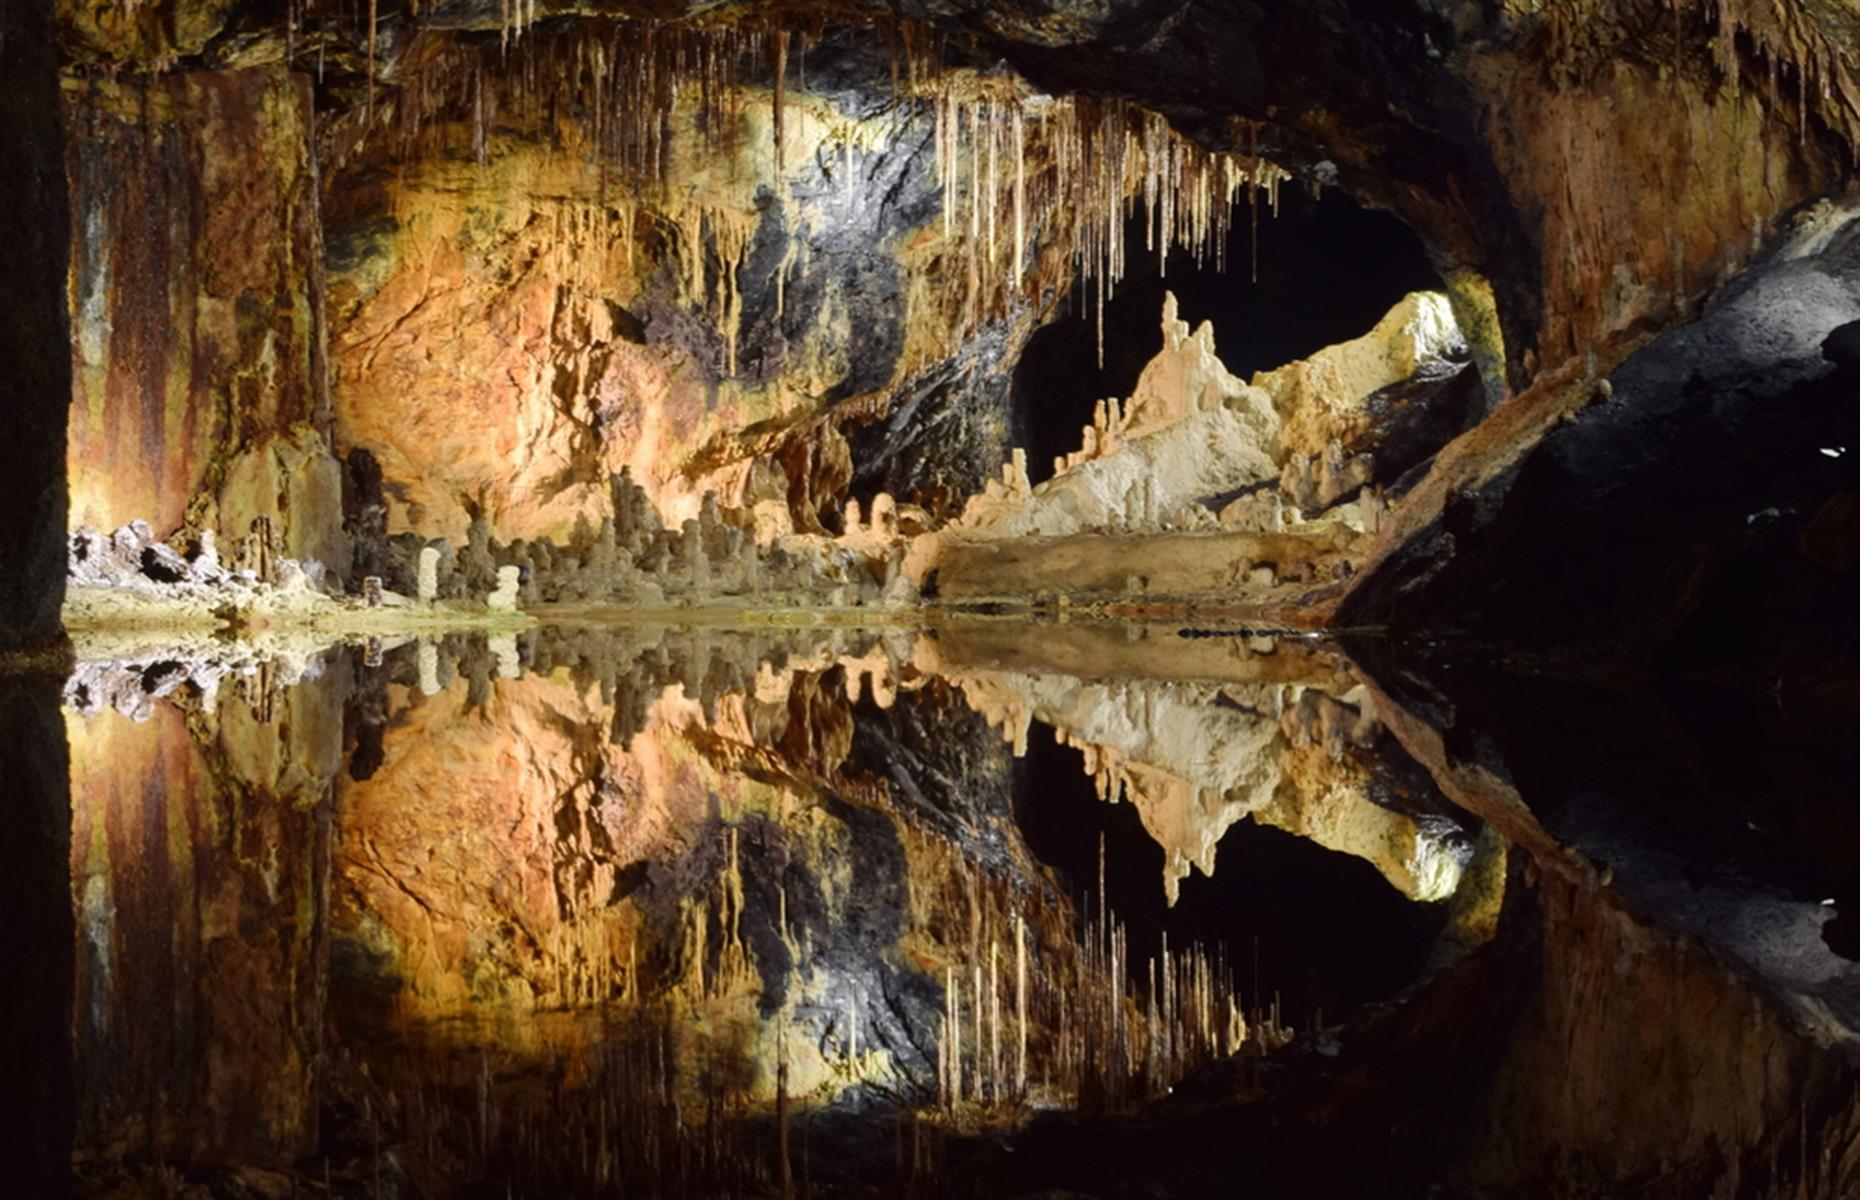 Perhaps one of the lesser-known caves on the list, Saalfeld Fairy Grottoes in Germany is also one of the most spectacular. Water has been dripping through the soft rocks for years to create the colorful mineral formations. This one-time mine was re-discovered in 1913 and opened to the public a year later.